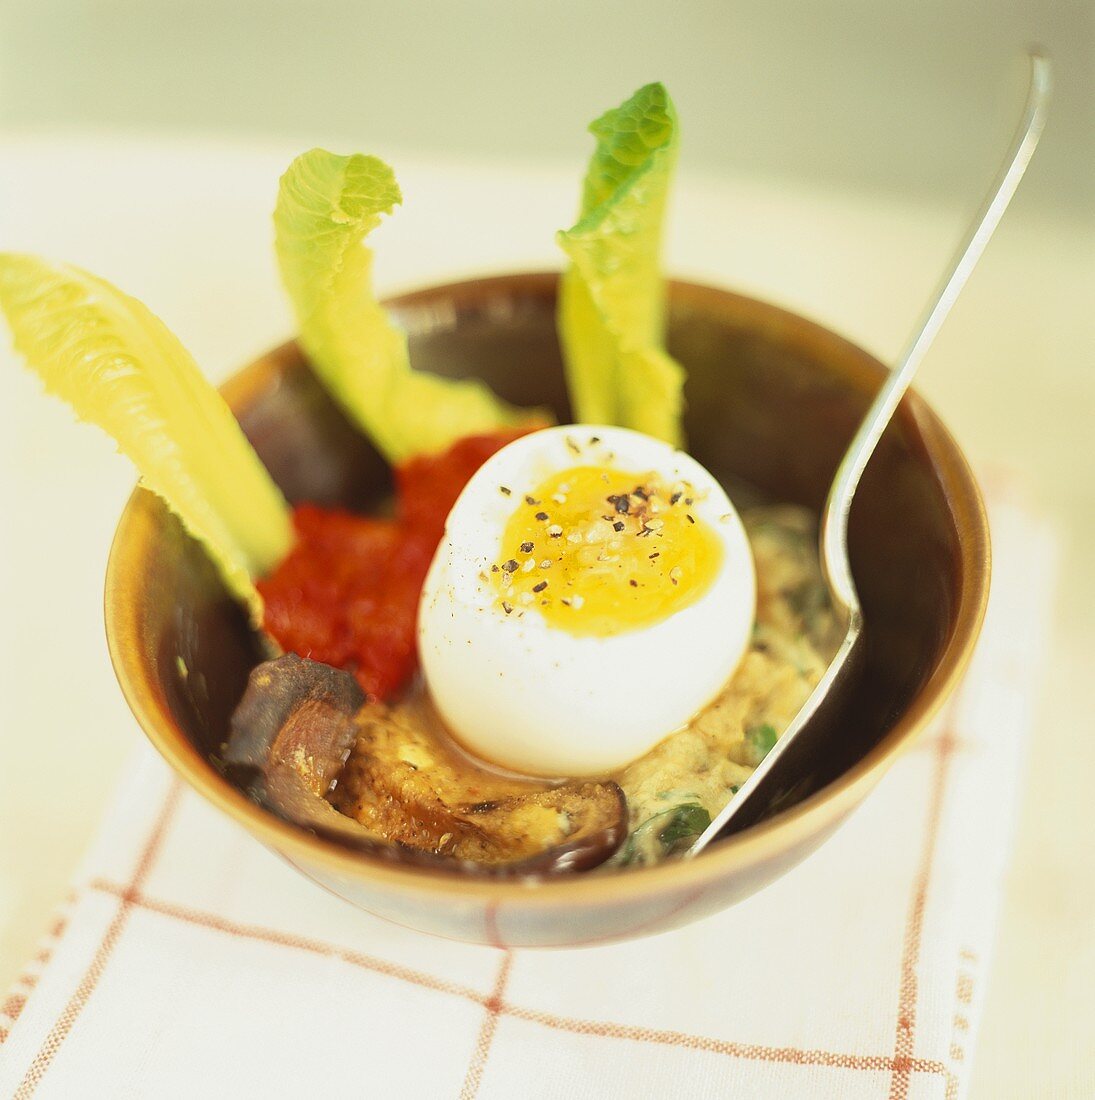 Soft egg and aubergine on risotto